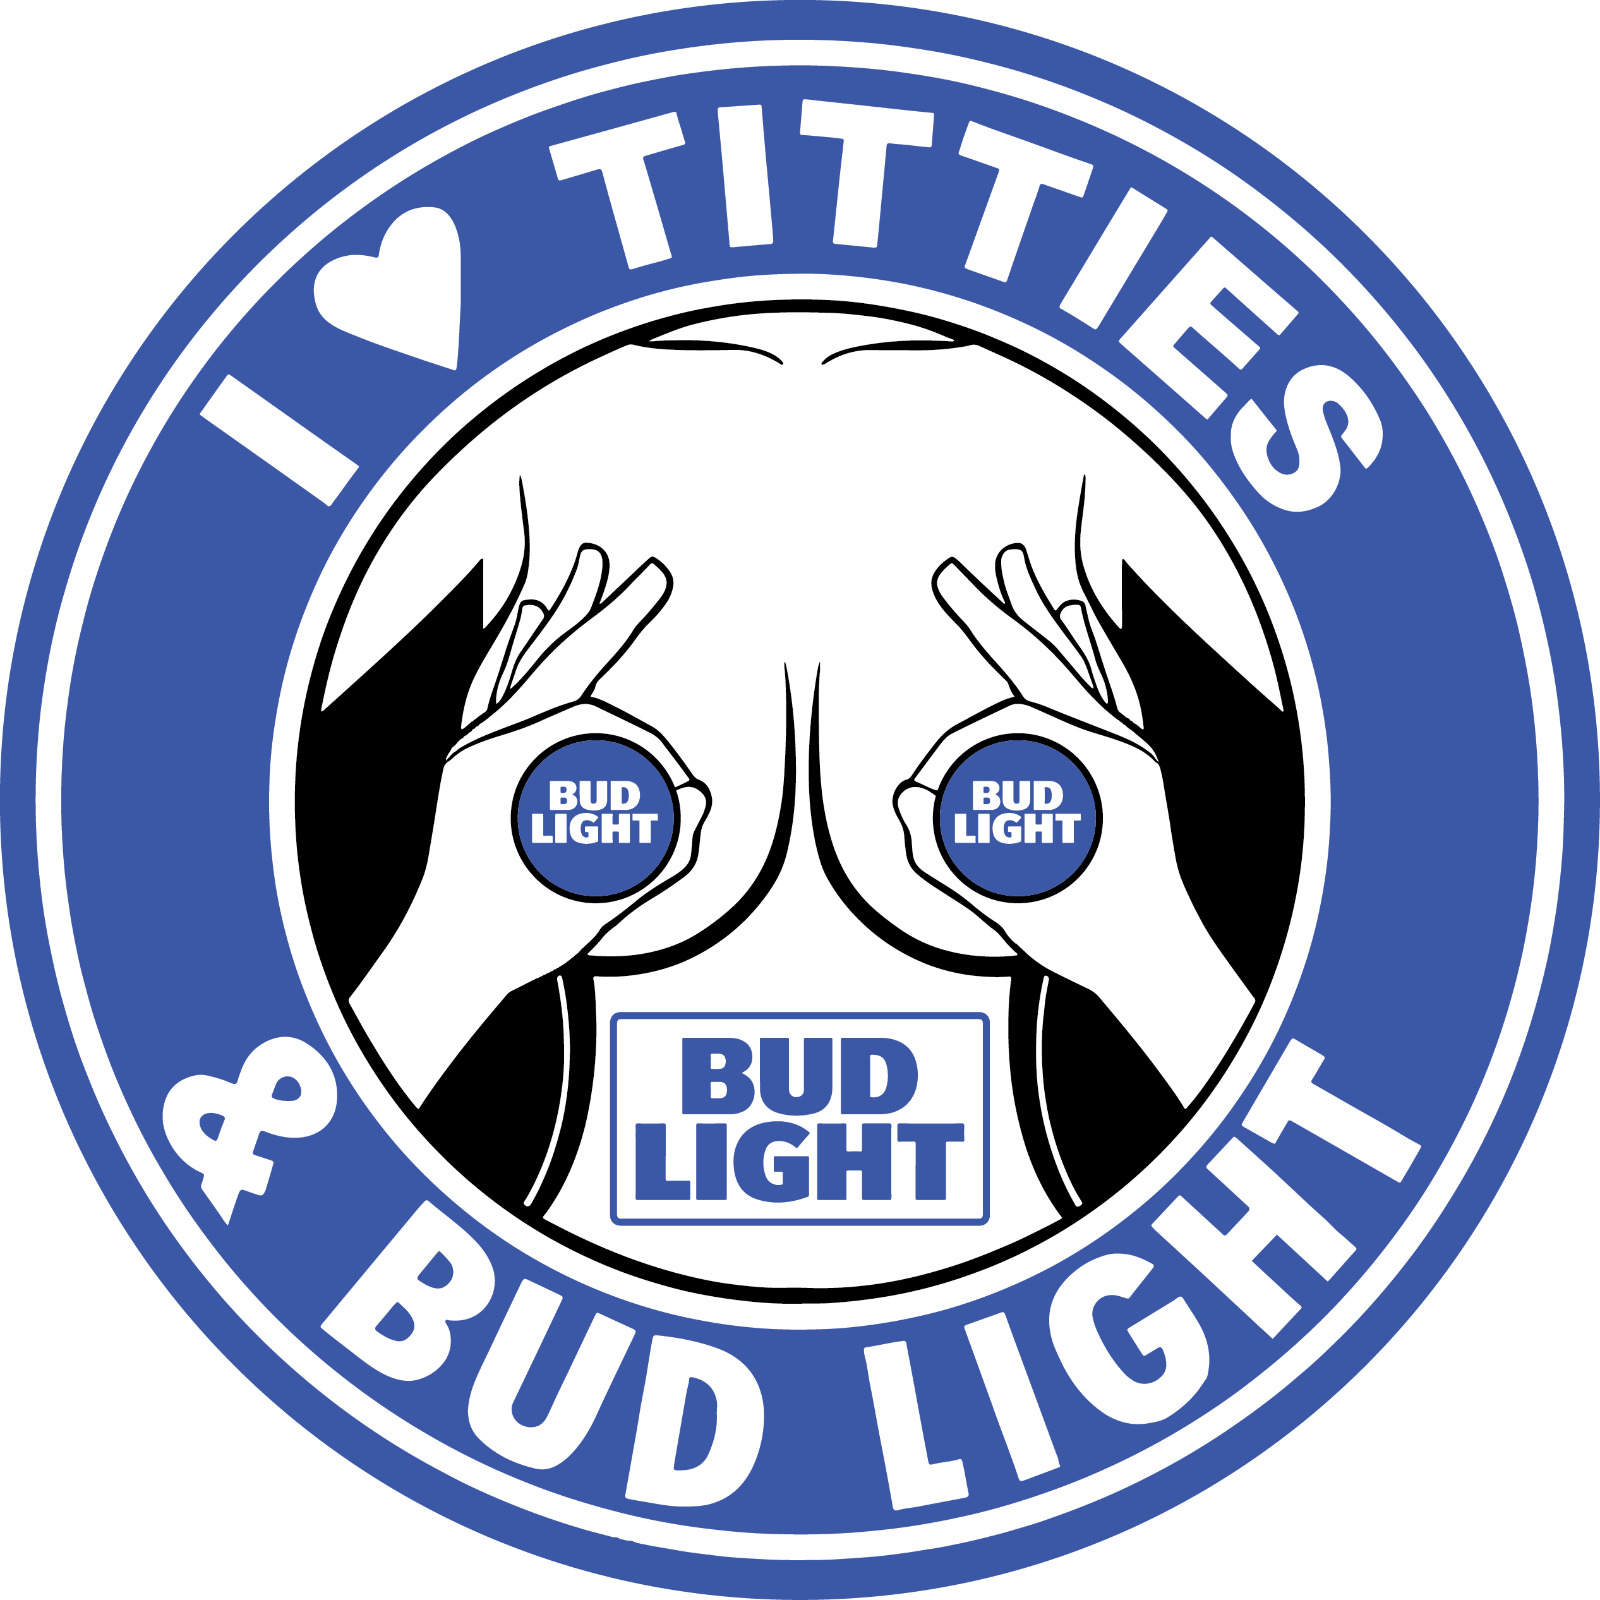 I Love Titties and Bud Light. Decal printed on white vinyl